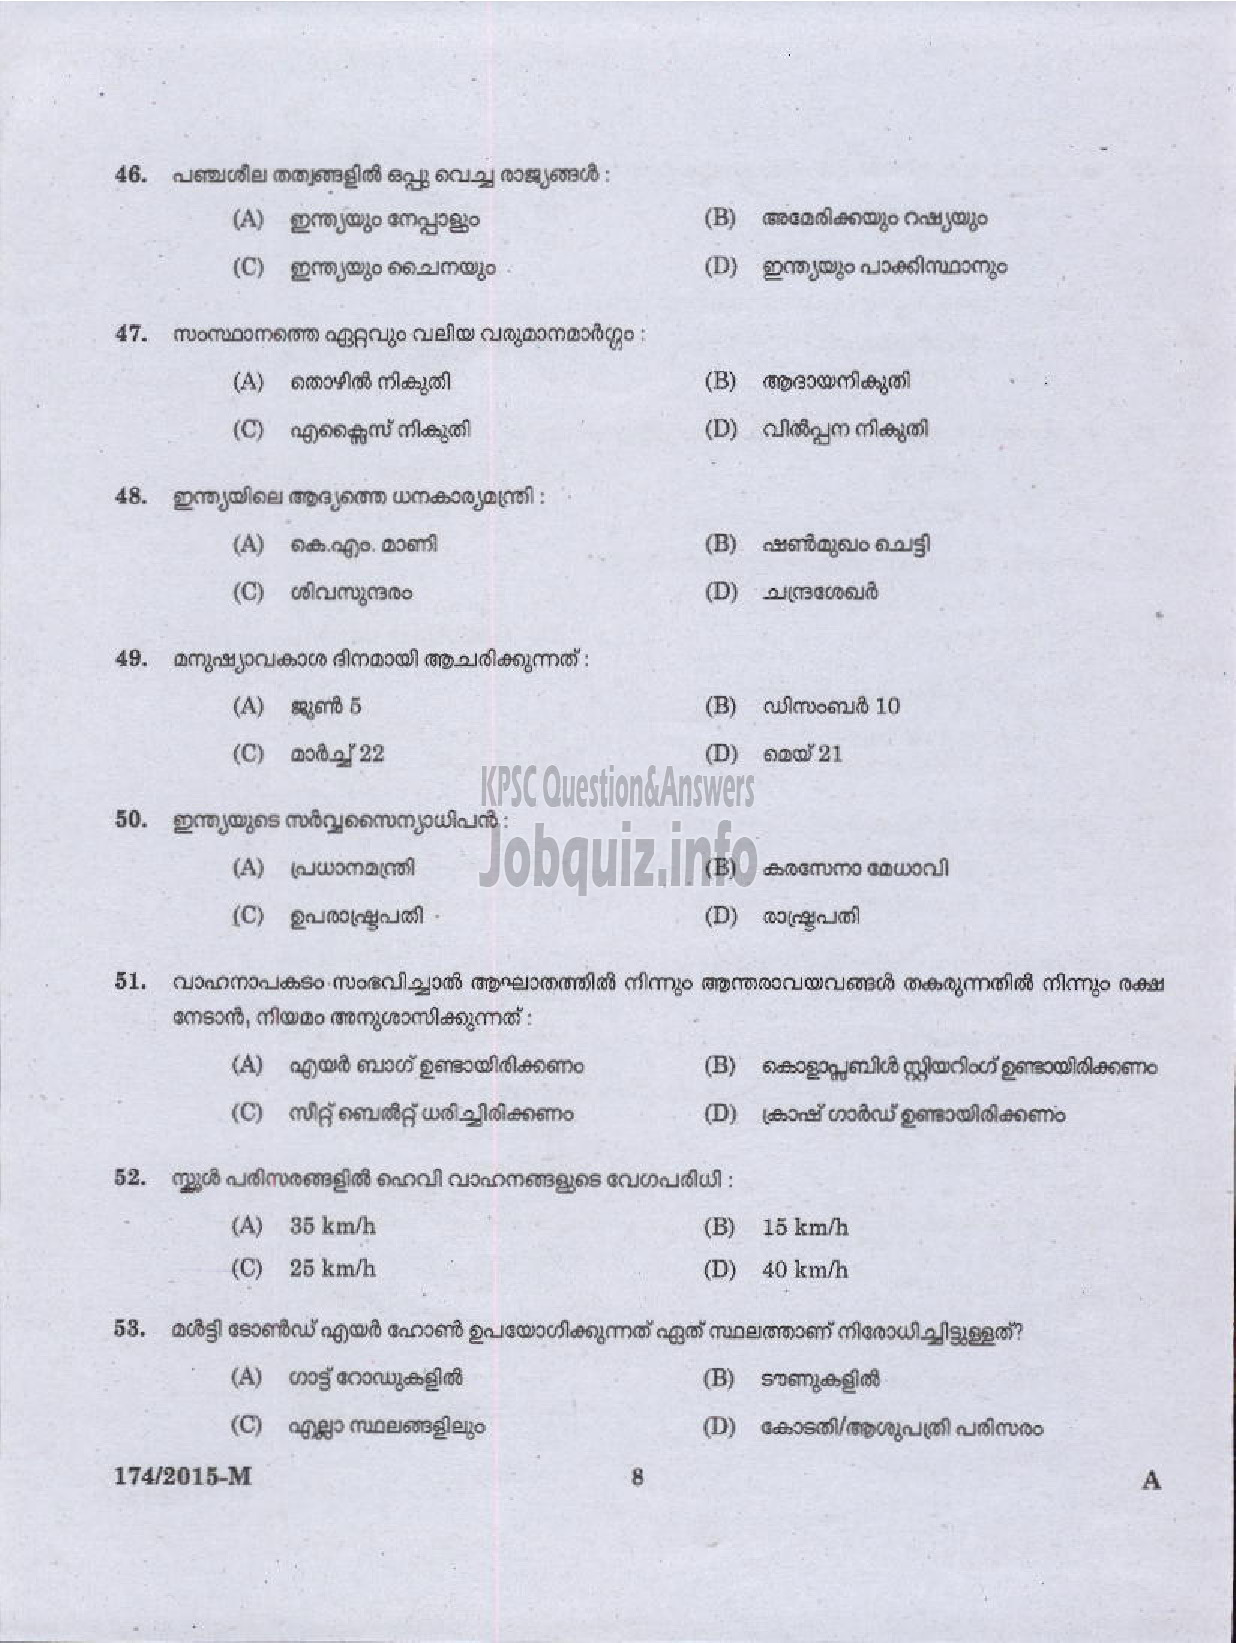 Kerala PSC Question Paper - DRIVER GRADE GR II HDV VARIOUS/EXCISE ( Malayalam ) -6